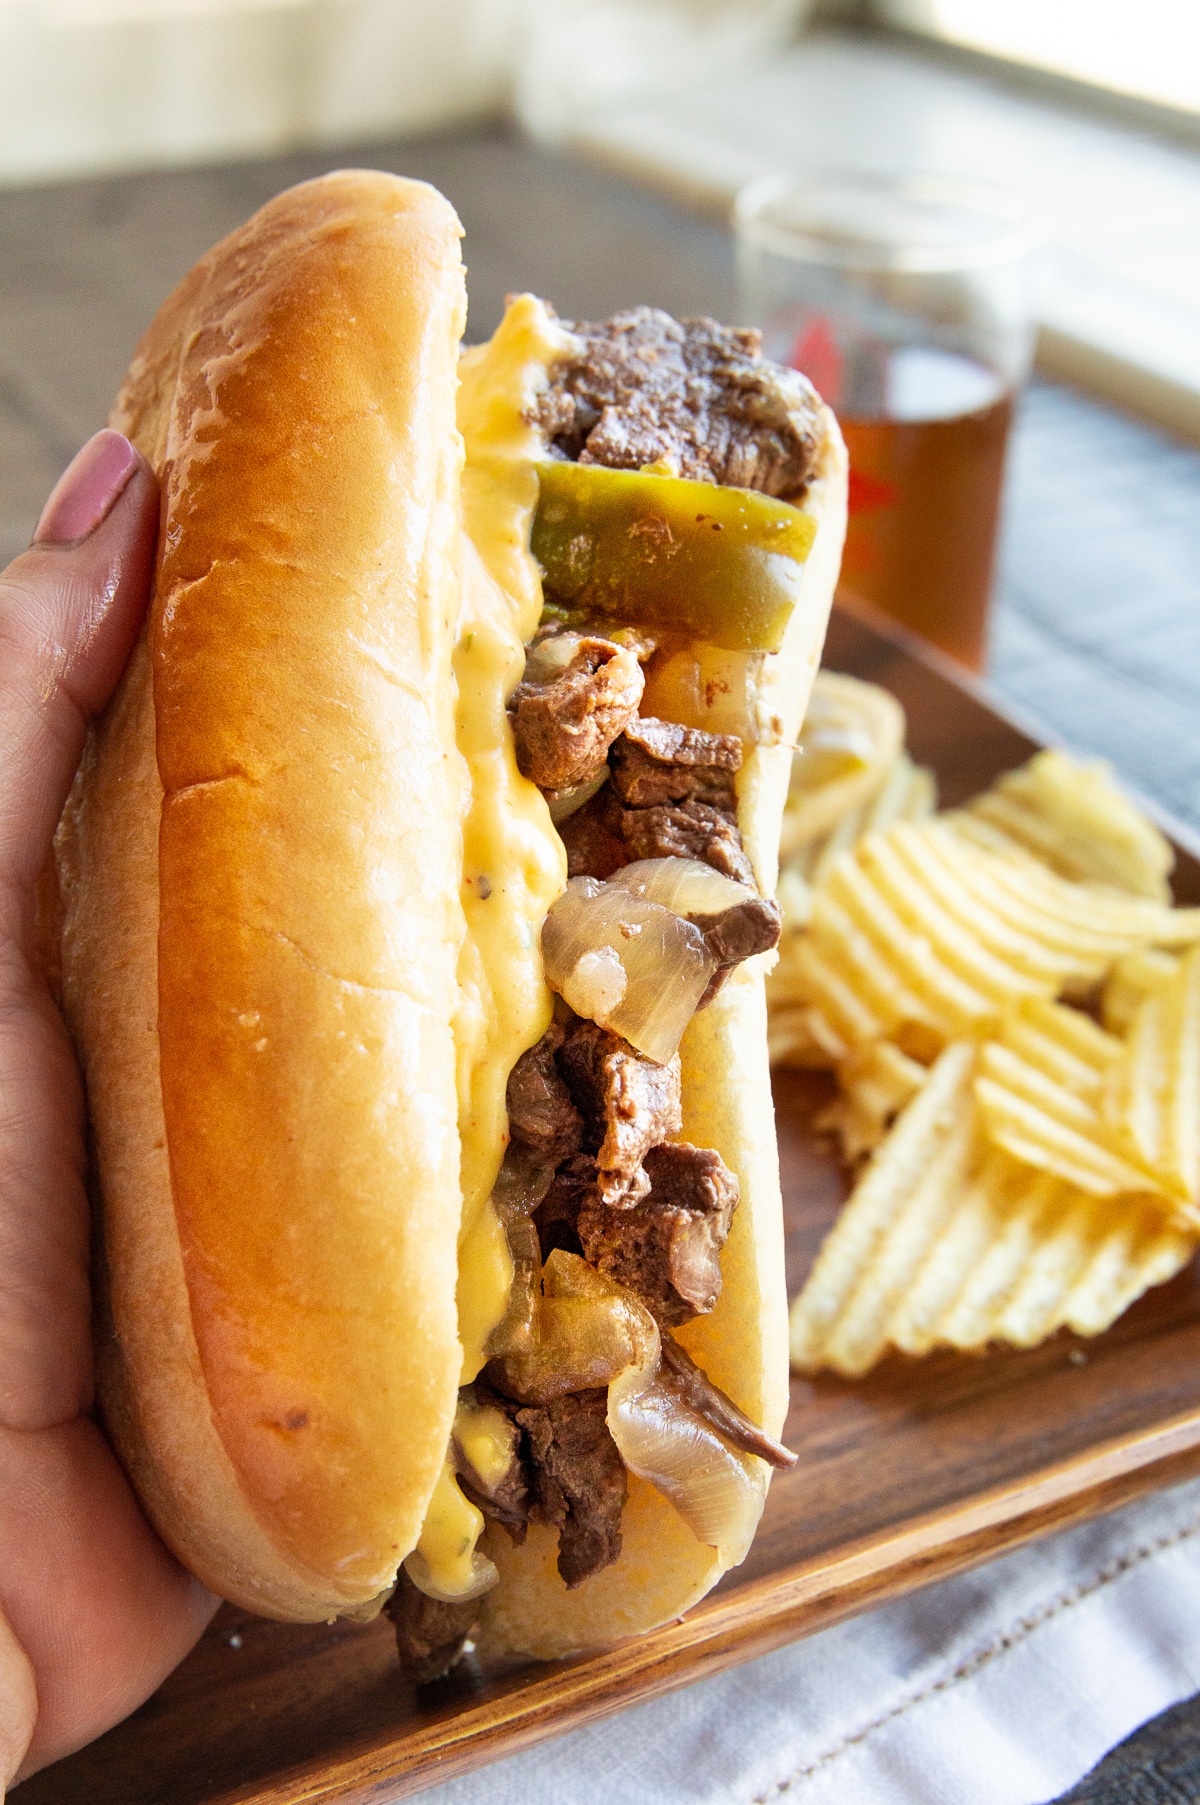 Instant Pot Philly Cheesesteak Great Discounts, Save 61% | jlcatj.gob.mx